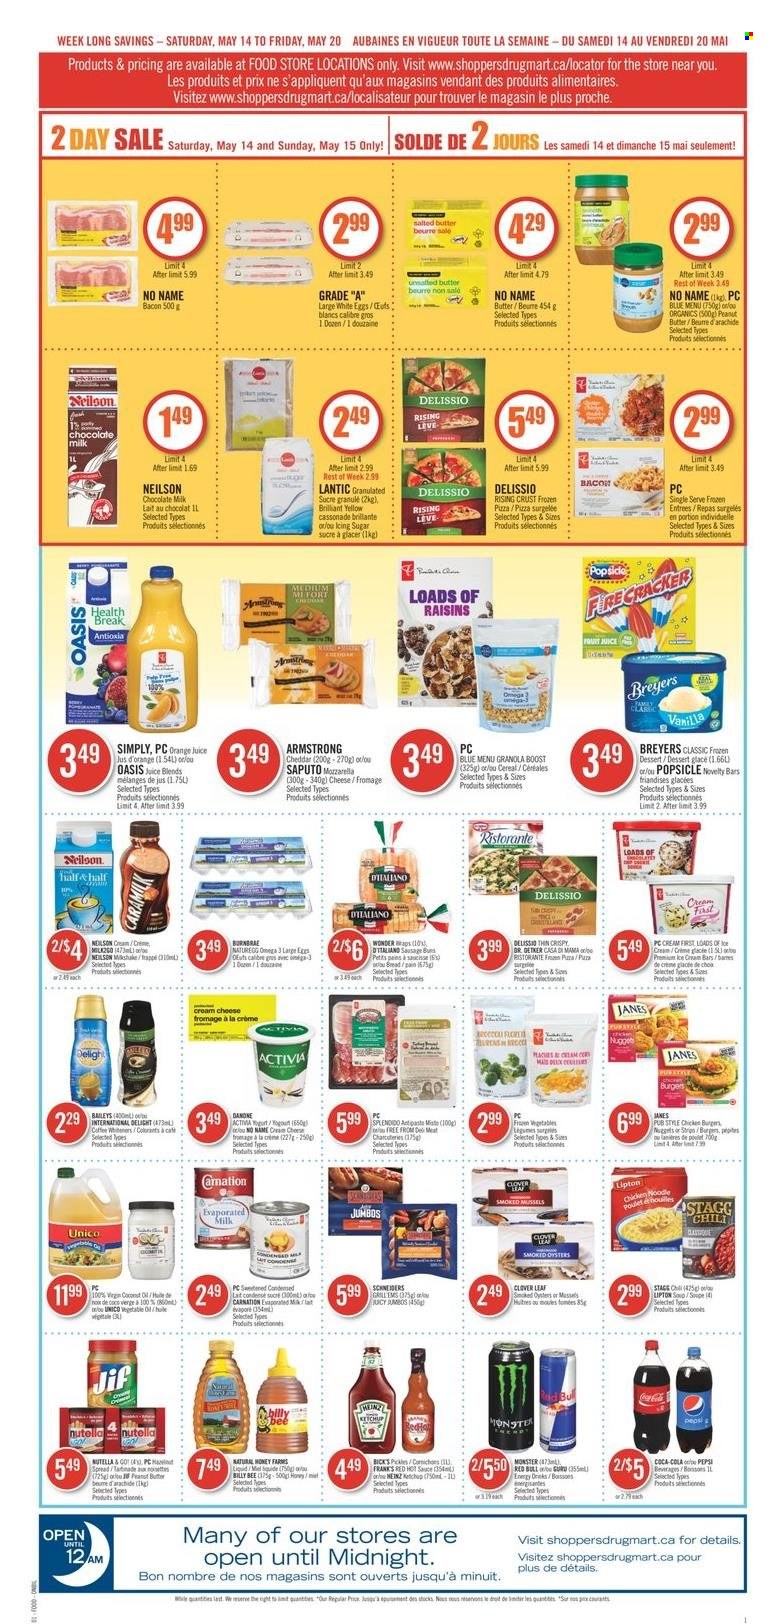 thumbnail - Shoppers Drug Mart Flyer - May 14, 2022 - May 20, 2022 - Sales products - milk chocolate, chocolate, sugar, sauce, cereals, hot sauce, honey, Jif, dried fruit, Coca-Cola, Pepsi, juice, Monster, Clover, Red Bull, Boost, coffee, Omega-3, granola, mozzarella, raisins, Nutella, Danone, Lipton. Page 4.